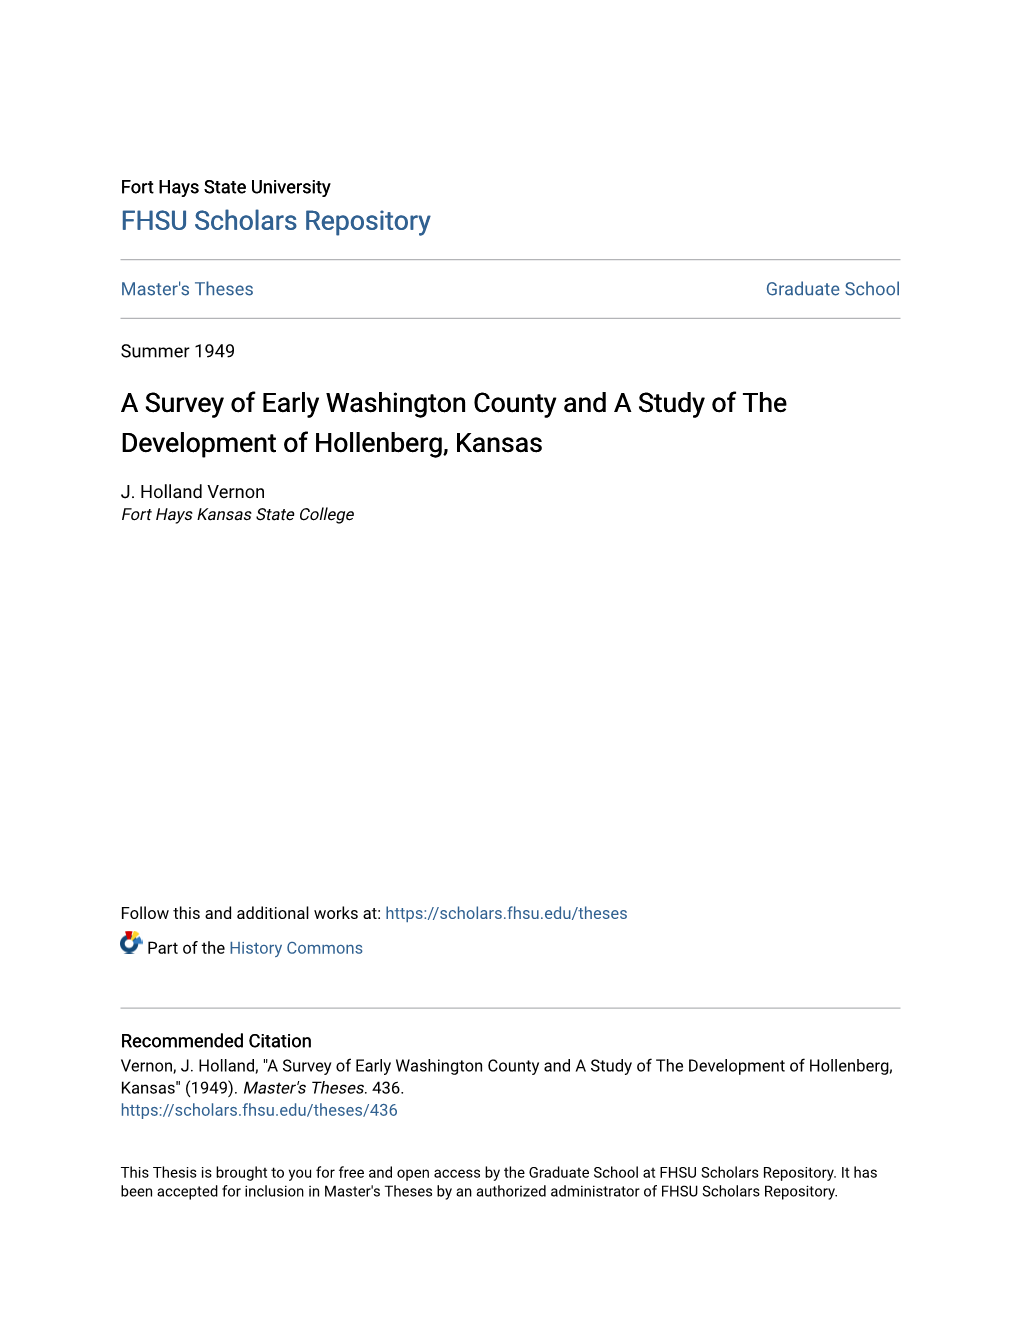 A Survey of Early Washington County and a Study of the Development of Hollenberg, Kansas